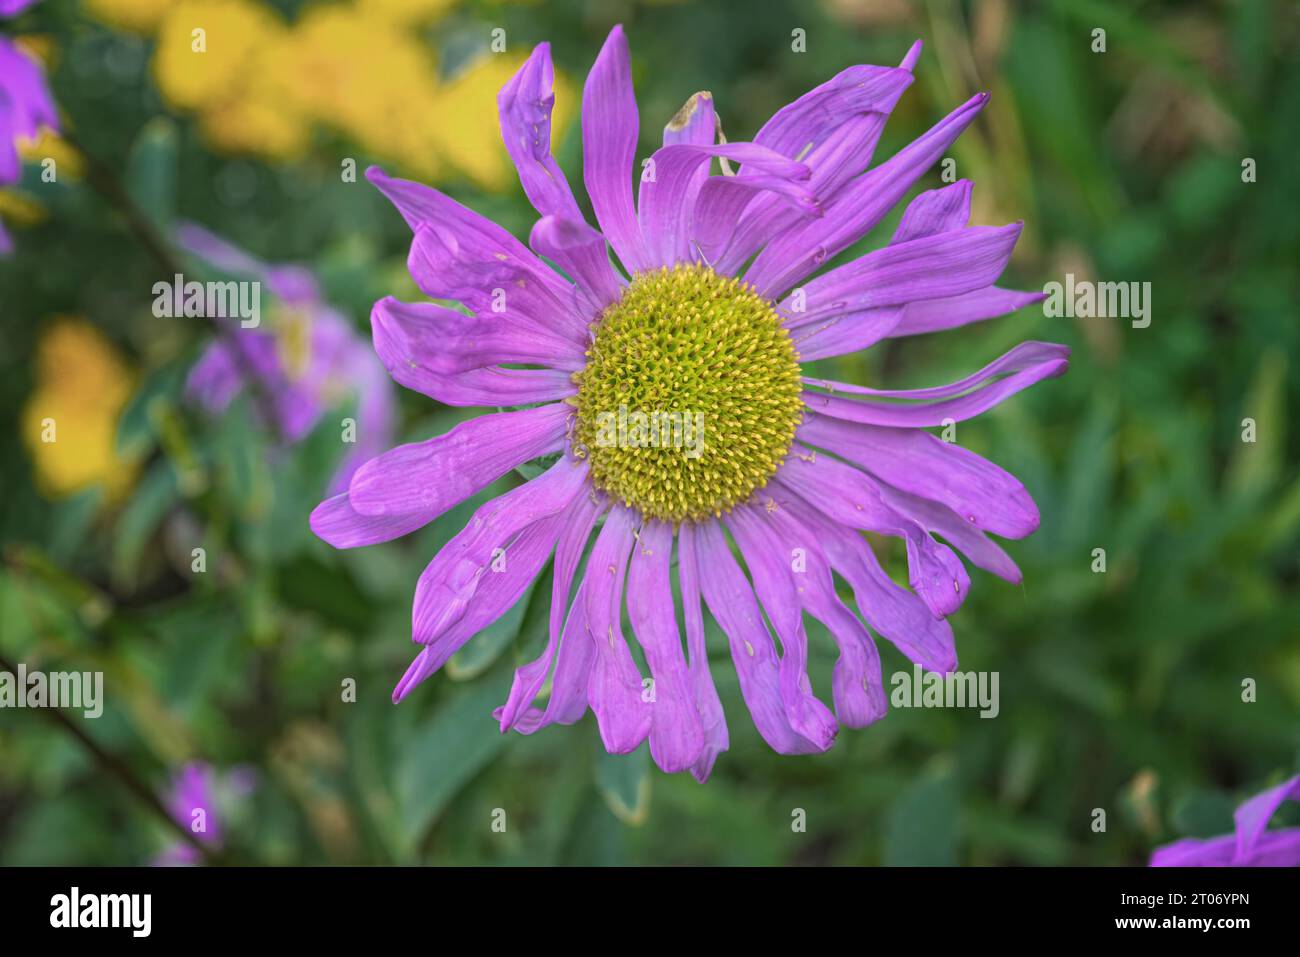 Closeup of flower of Aster alpinus in a garden in early autumn against diffused background close-up. Stock Photo